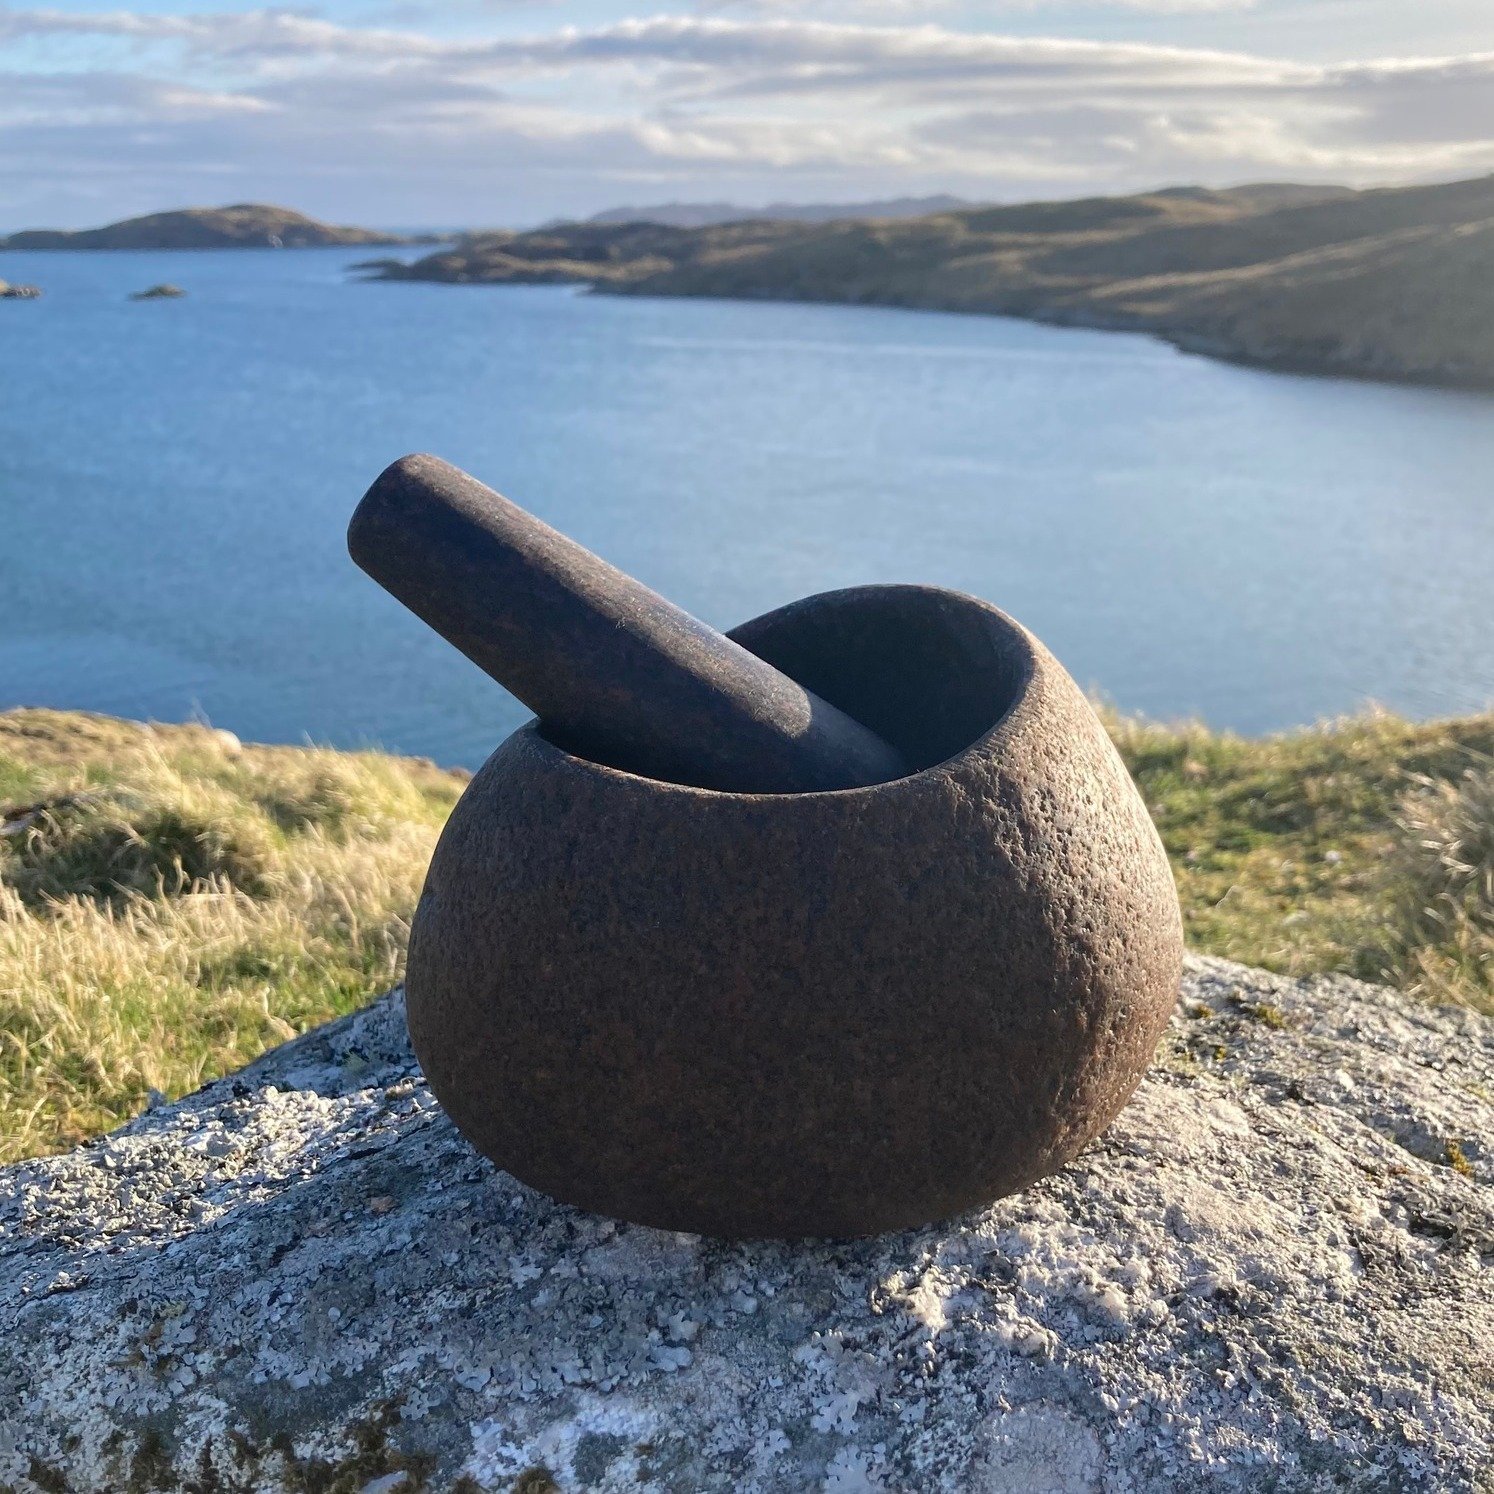 We recently released what we had planned to be our final small batch of Mortar and Pestles to our waiting list of customers, only for these to sell out in record time.

As we have now had a few disappointed emails from those who missed out, we have d